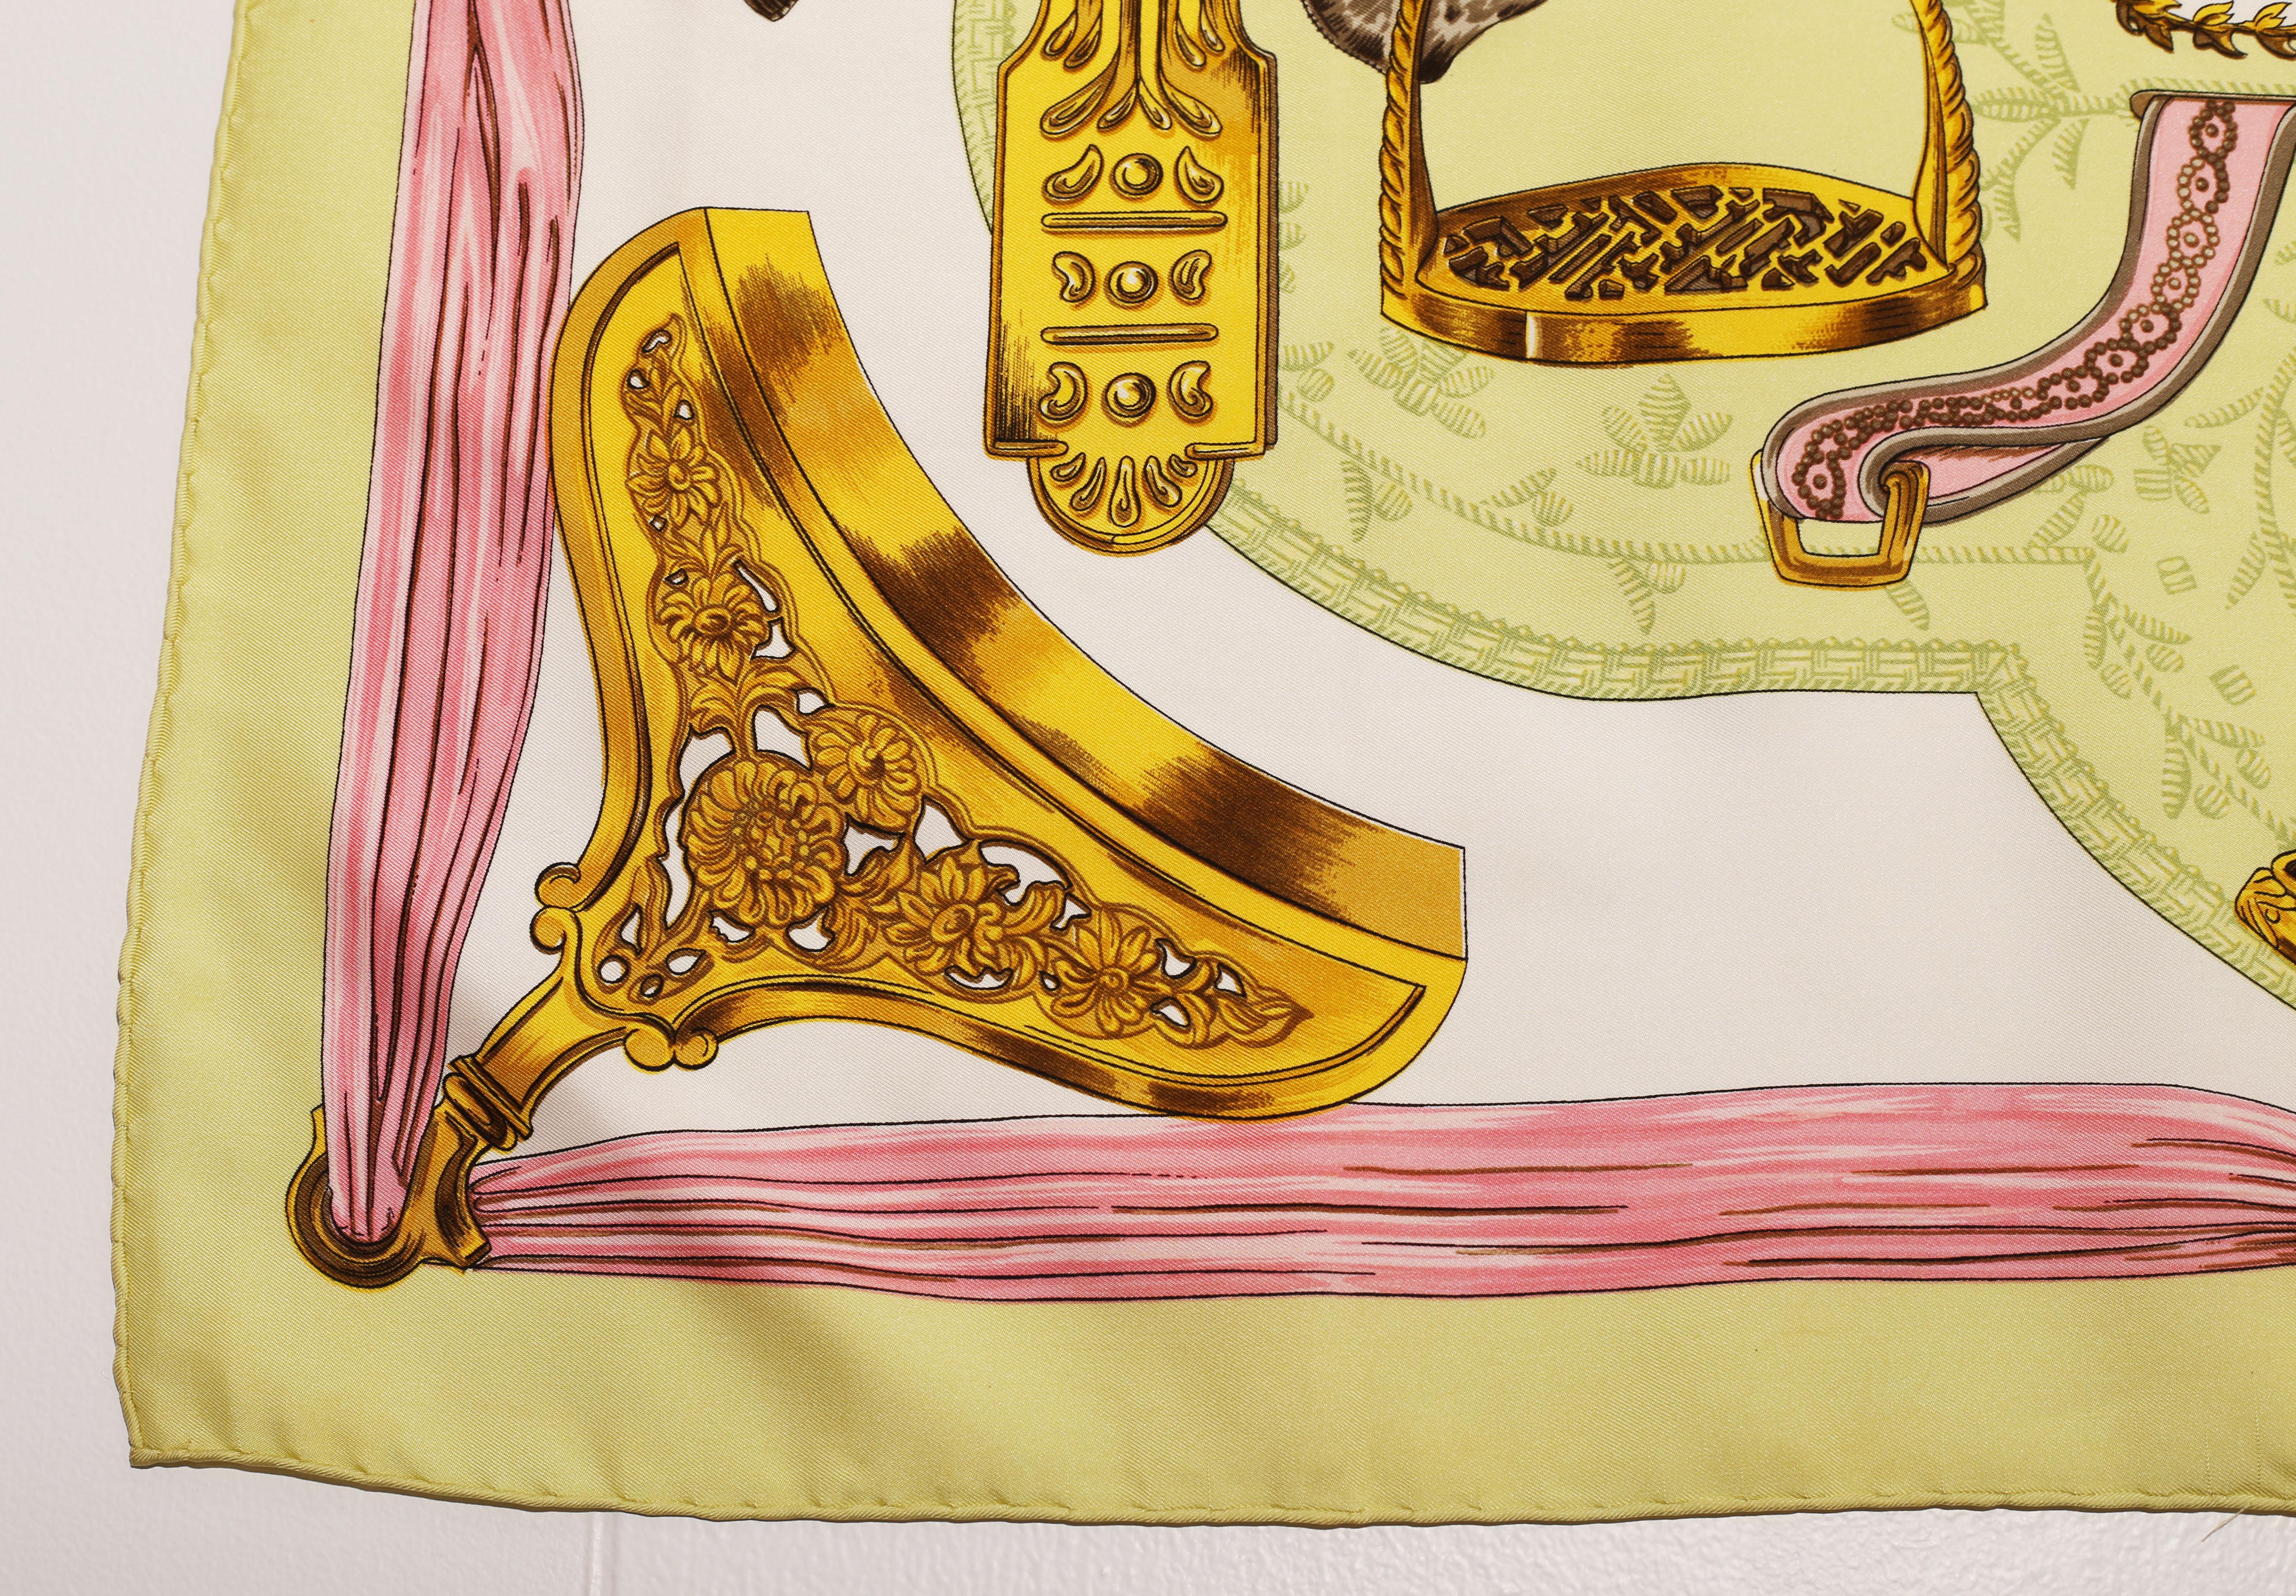 HERMES Scarf  Silk Scarf 100%  Paris, Made In France 
TheEtriers was designed by Françoise de la Perrière for the Maison Hermès and first issued in 1964.
At the center, a huge Peruvian pyramide shaped stirrup dating back to the second half of the